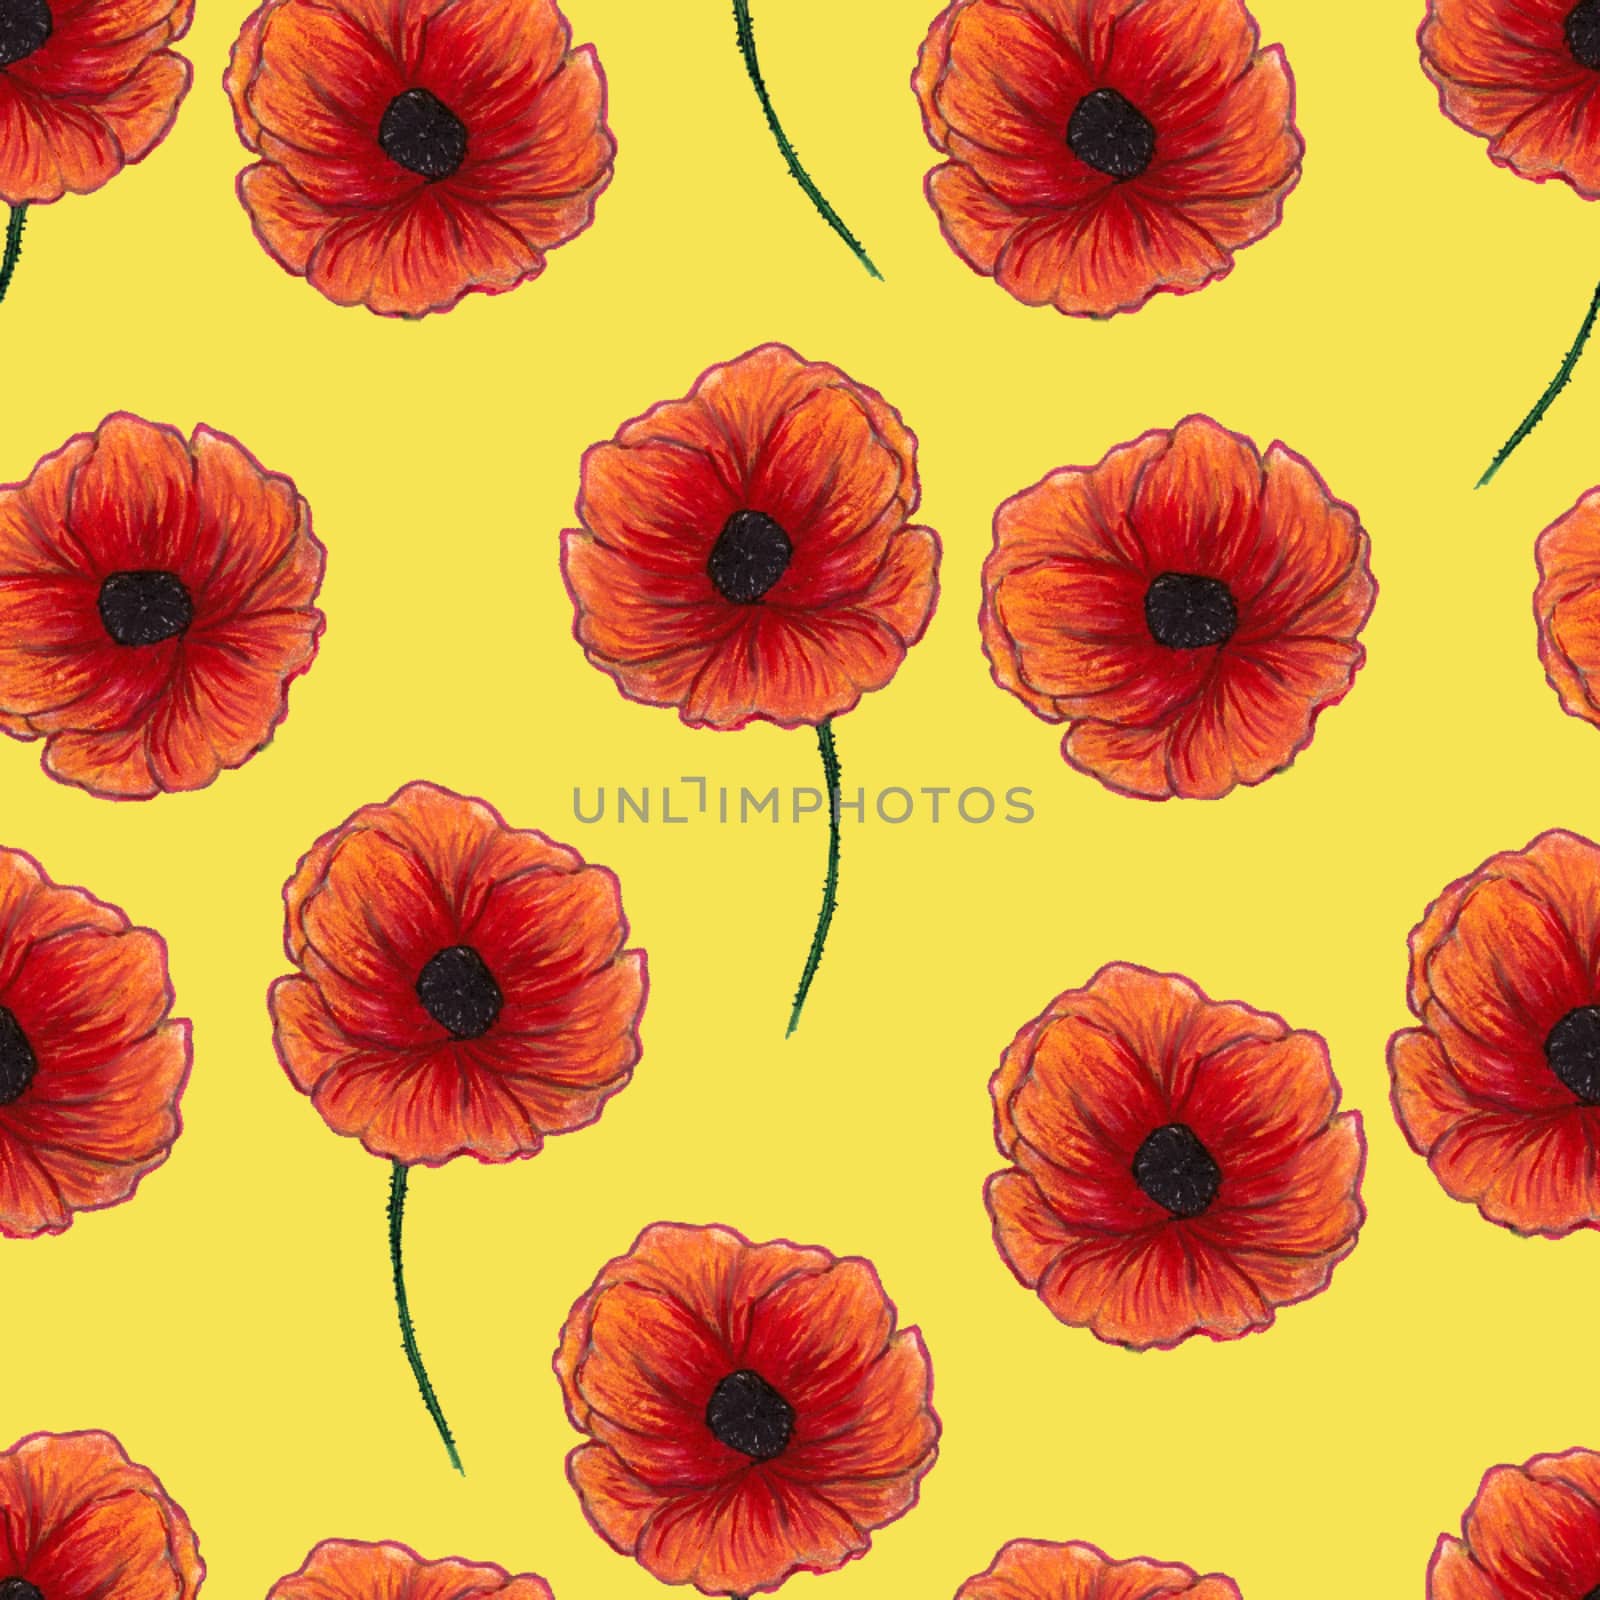 Beautiful red poppies isolated on yellow background. Bright Floral seamless Pattern. Summer backdrop. Can be used for textile,wallpaper,print,web design, fabric, wrapping paper.Hand drawn illustration by sshisshka